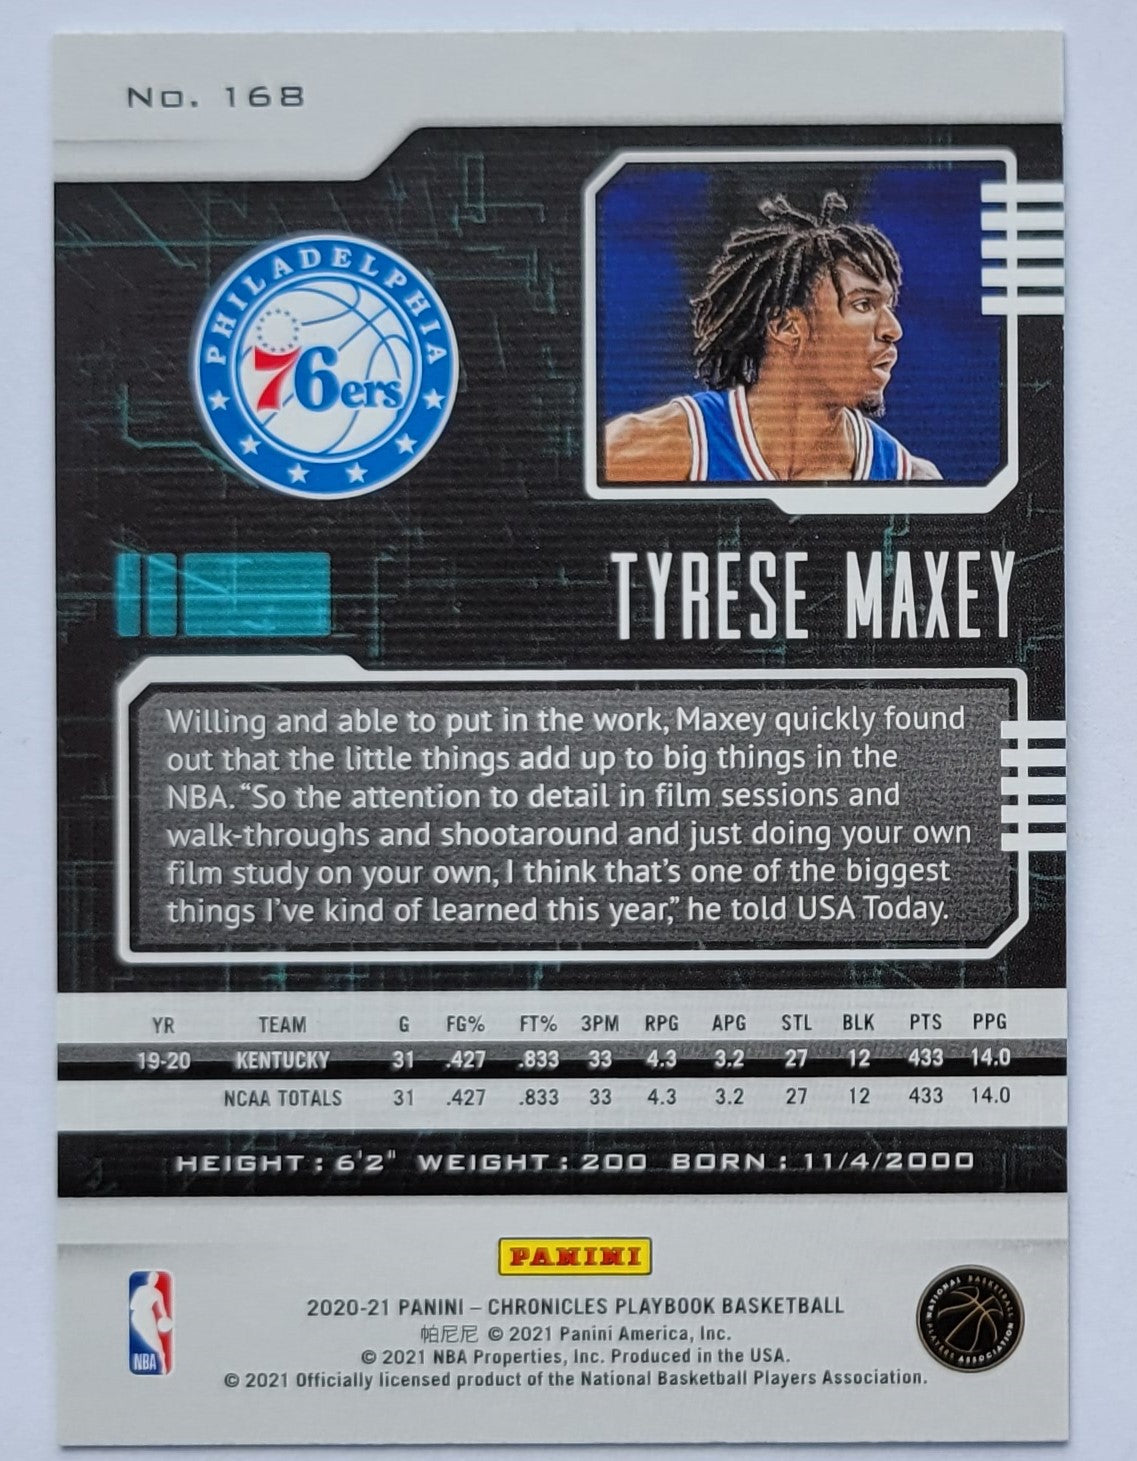 Tyrese Maxey - 2020-21 Panini Chronicles #168 Playbook RC